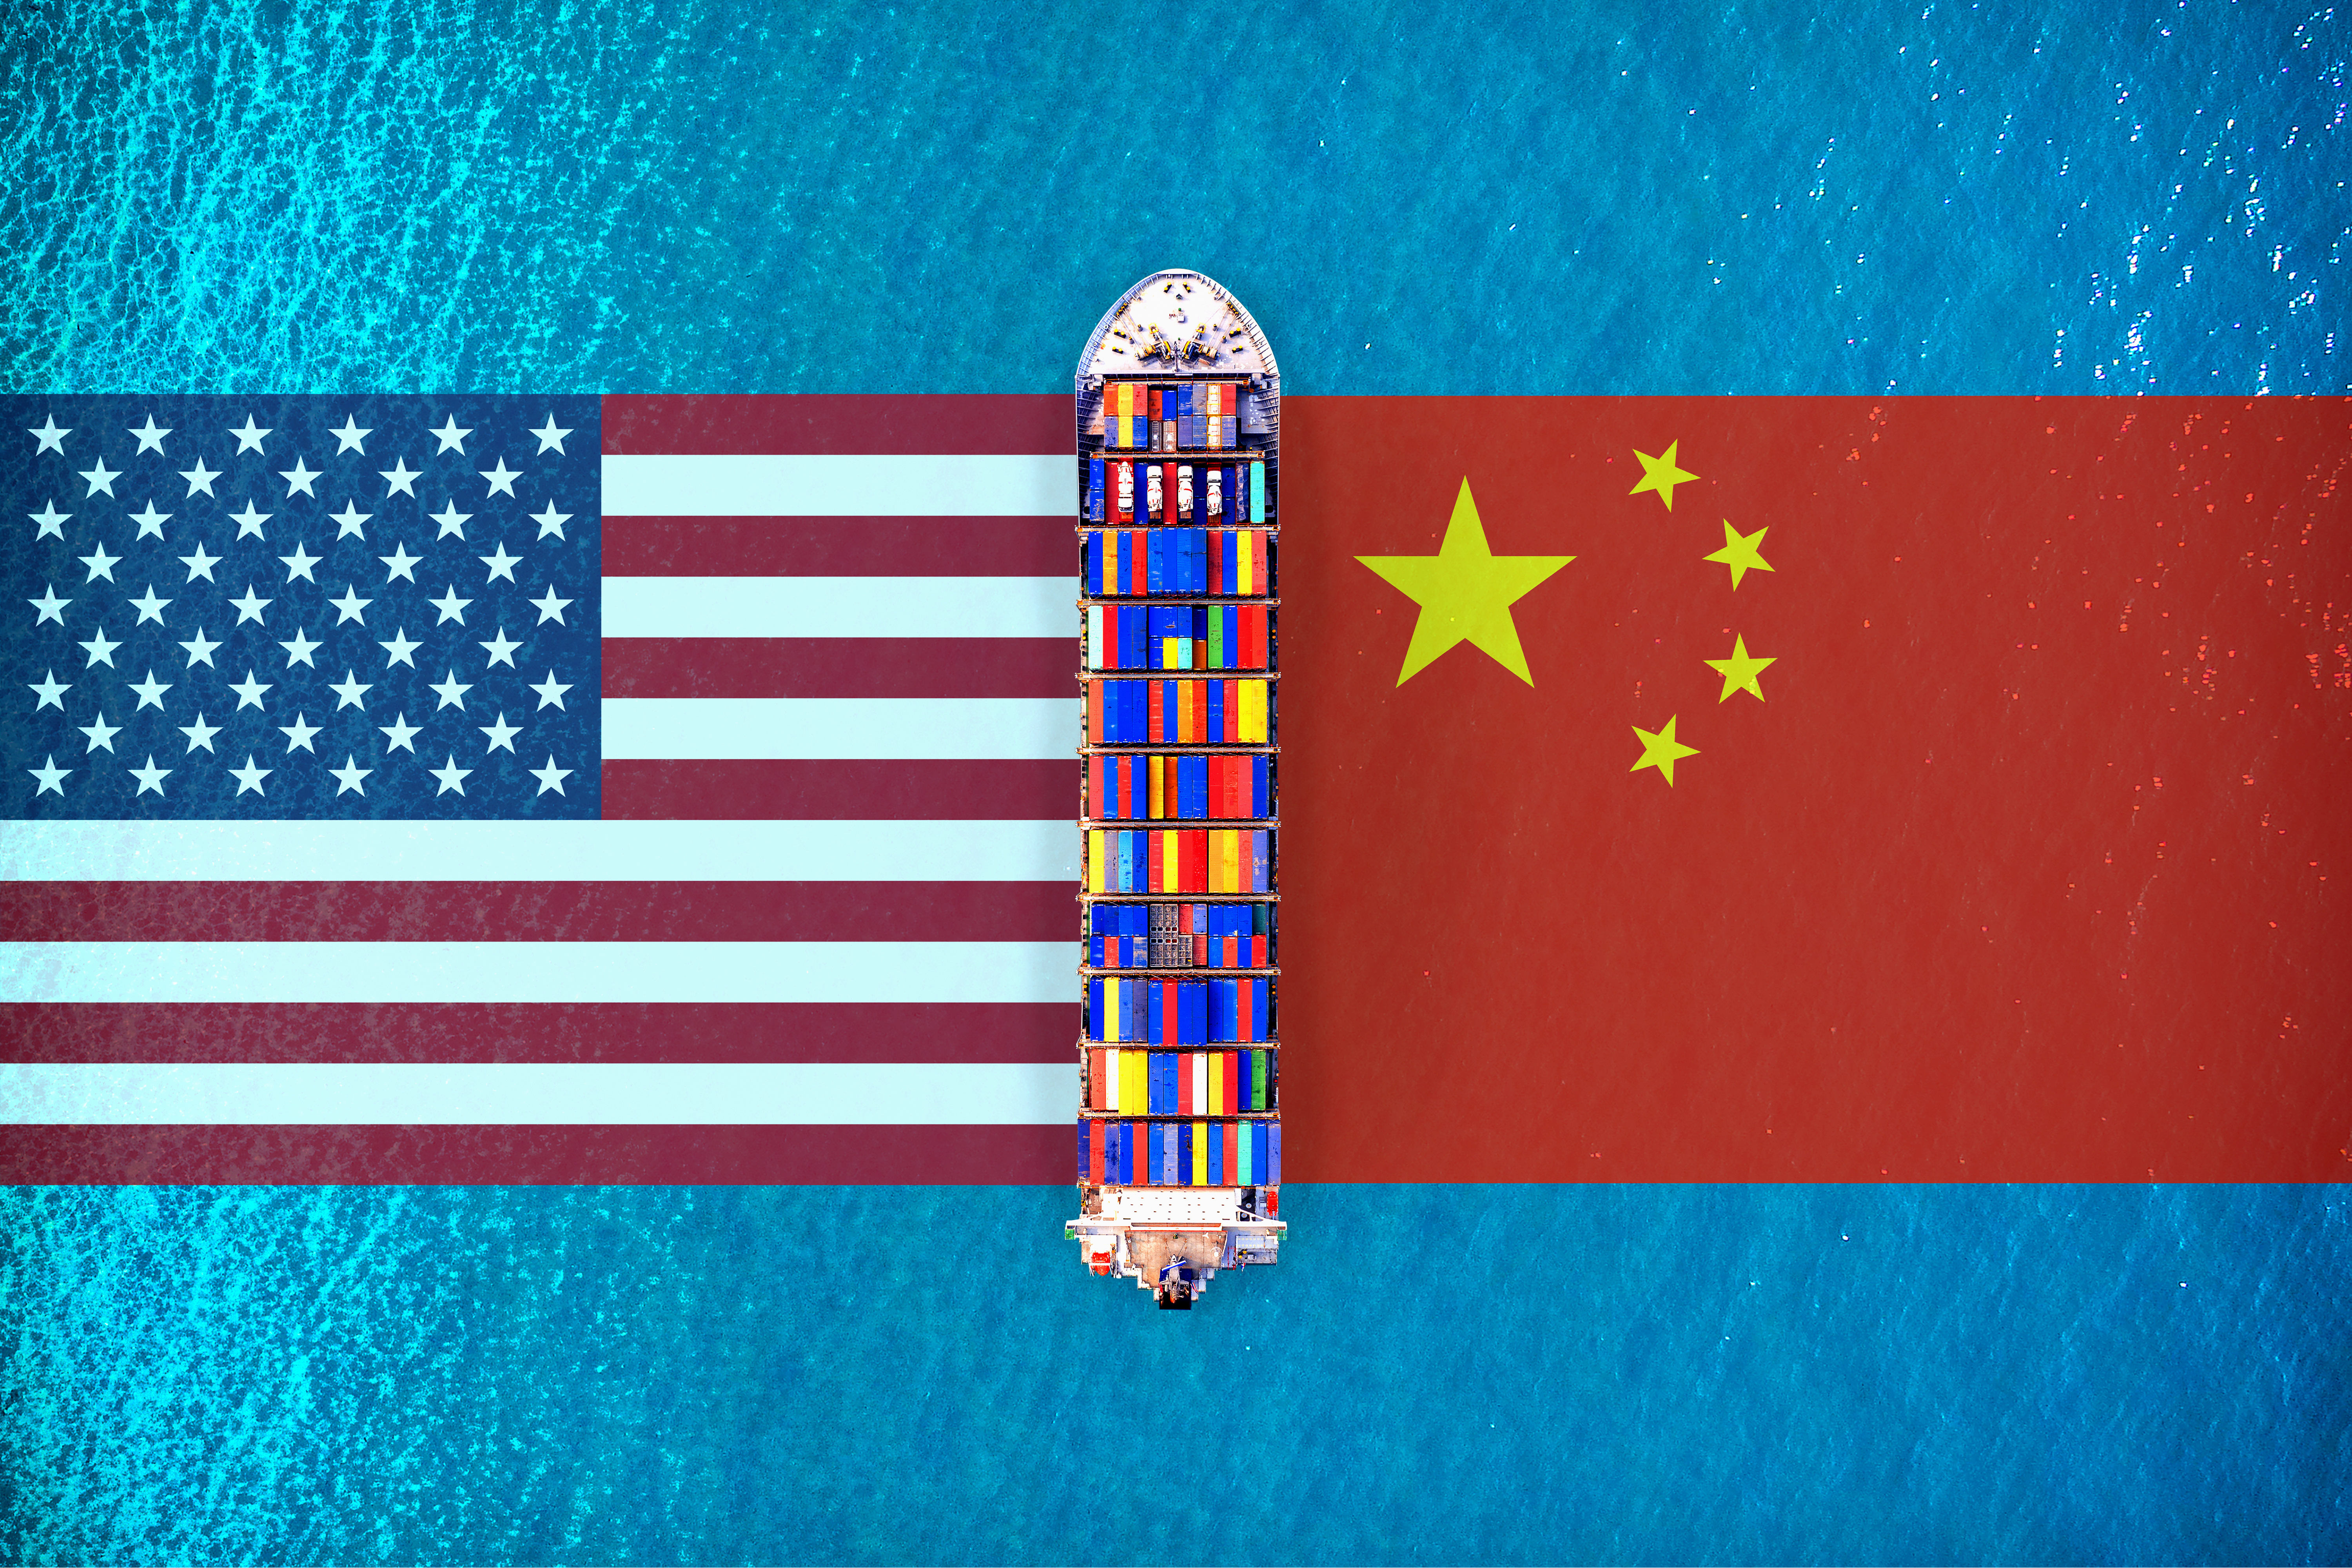 Overhead view of a container ship with the US and Chinese flags on either side